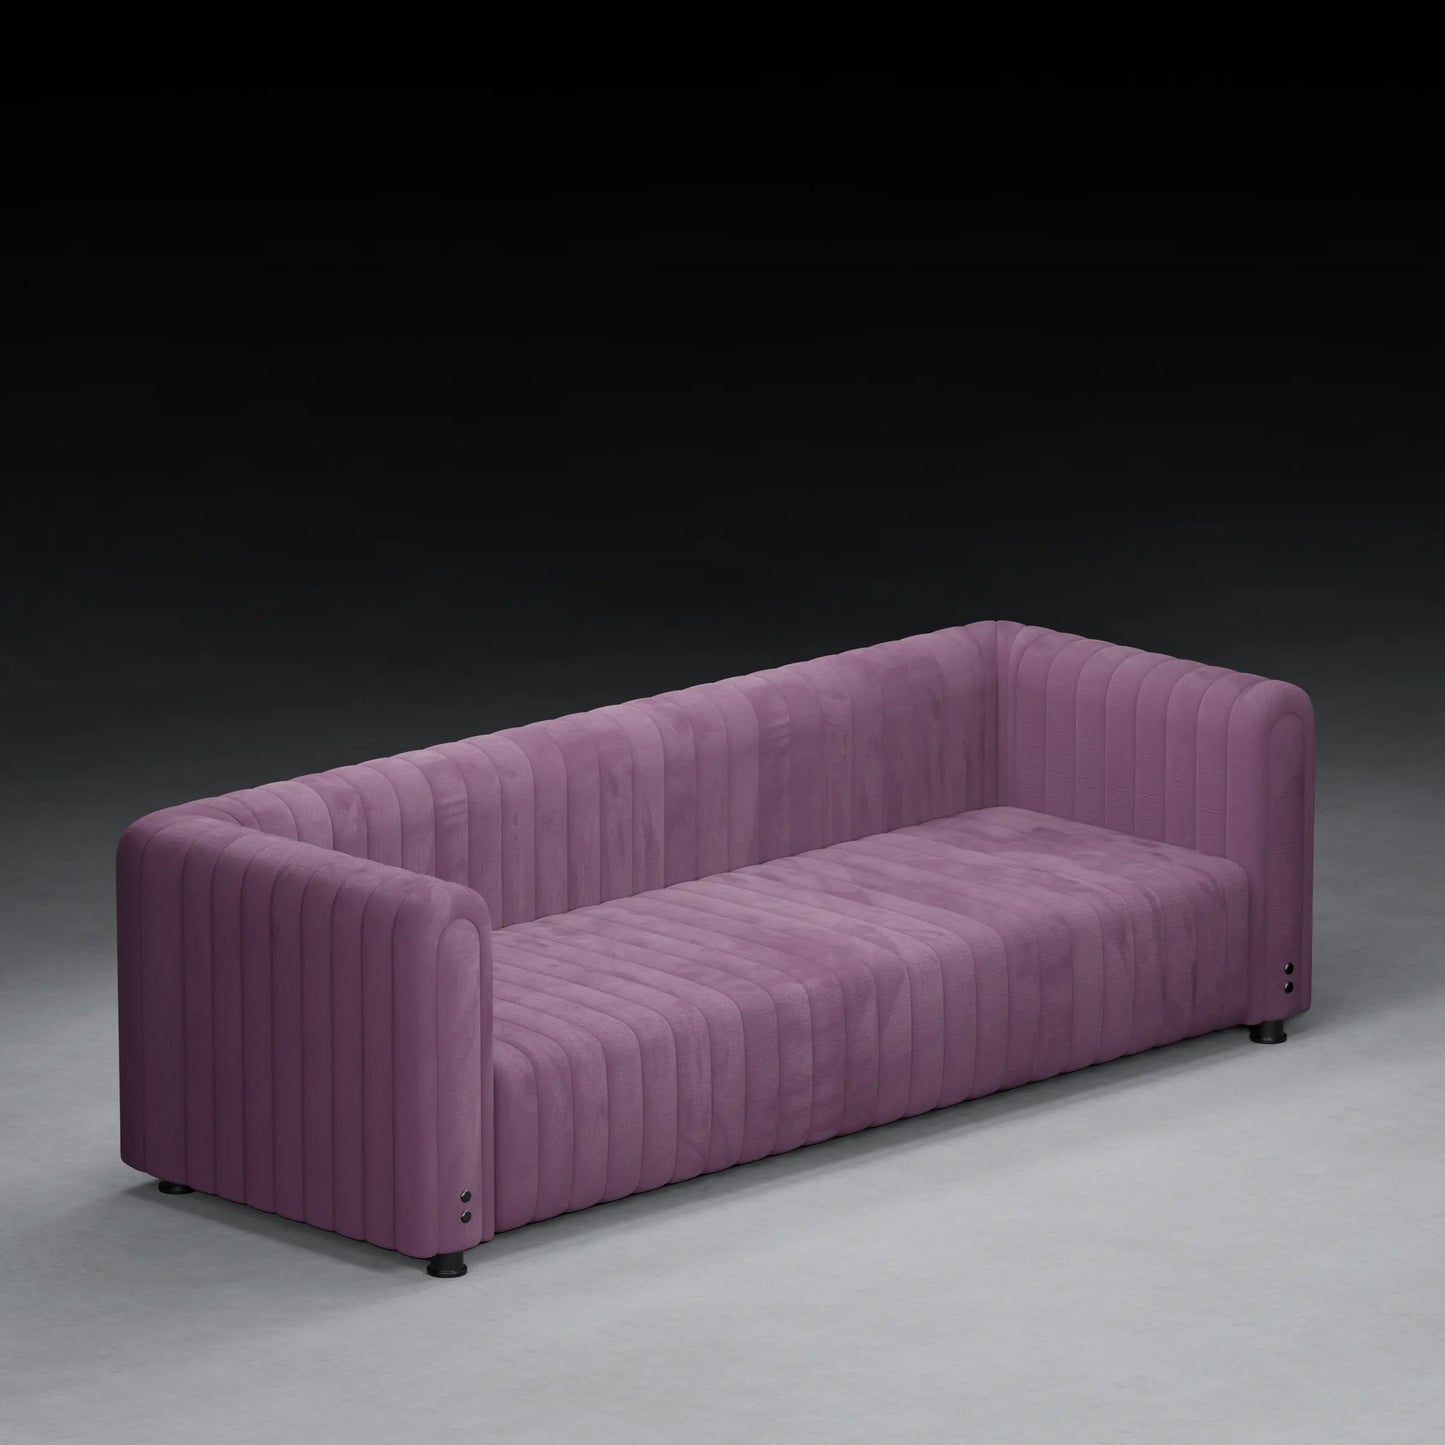 FIG  - XL 3 Seater Couch in Linen Finish | Violet Color